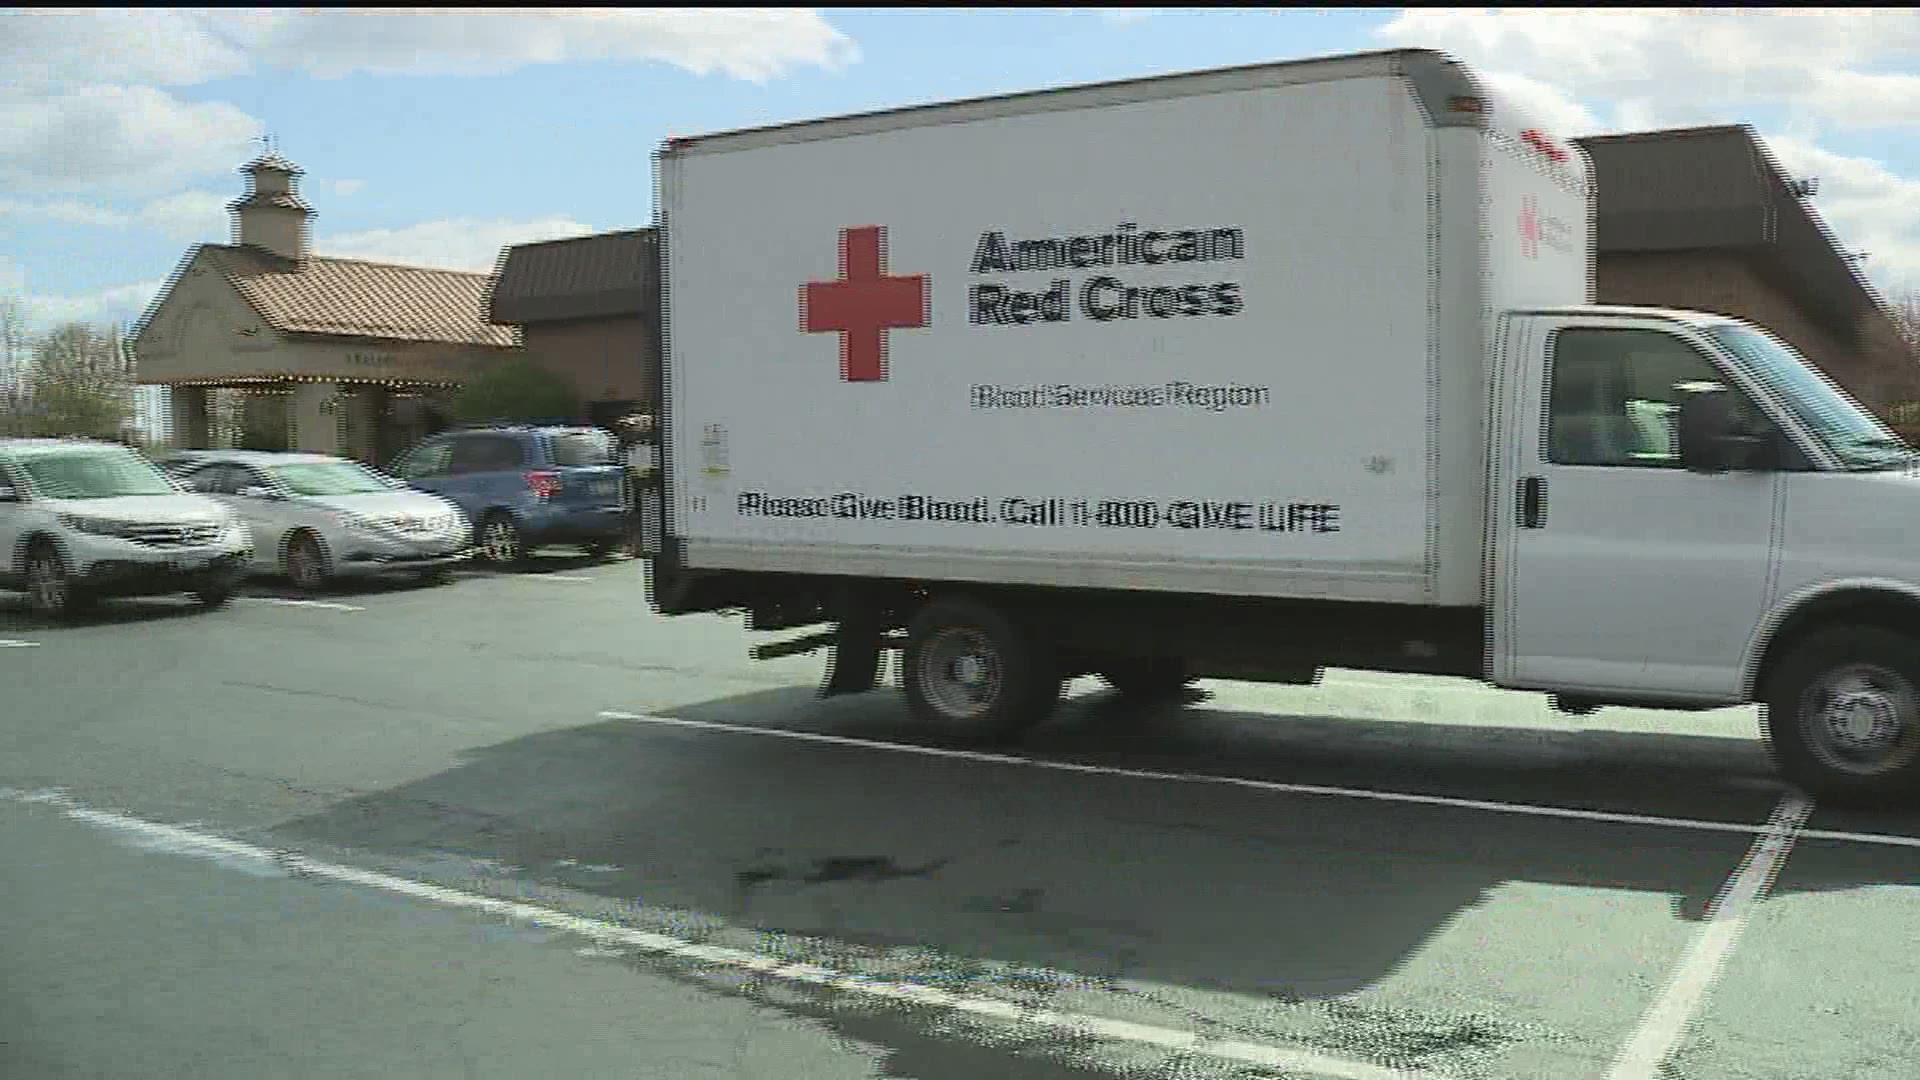 The American Red Cross says all types of blood are needed during the COVID-19 crisis.